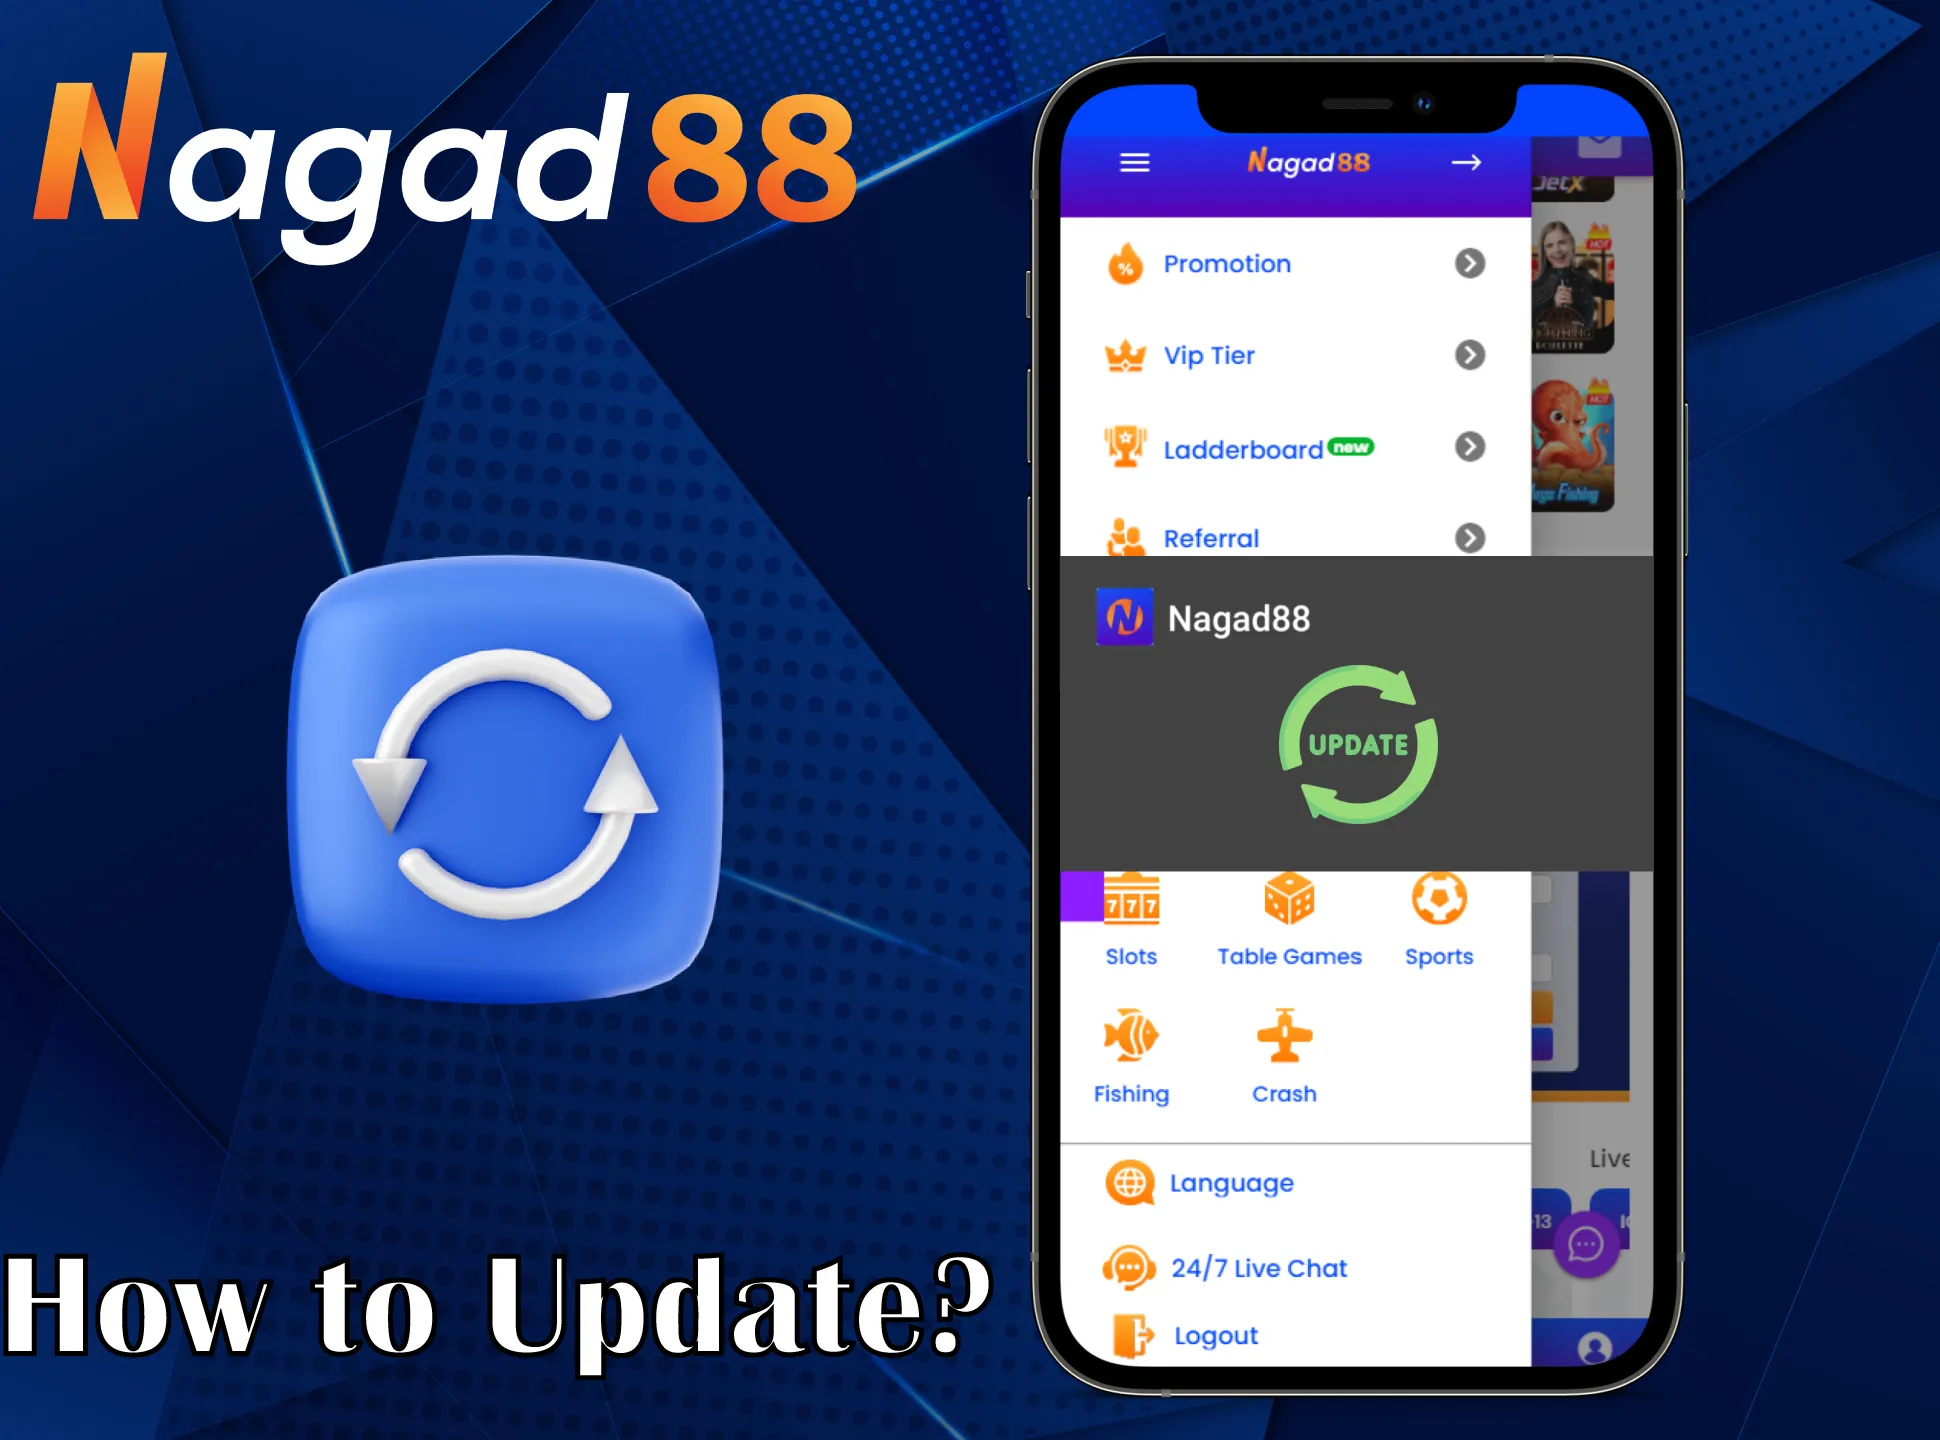 Learn how to simply update the Nagad88 app.